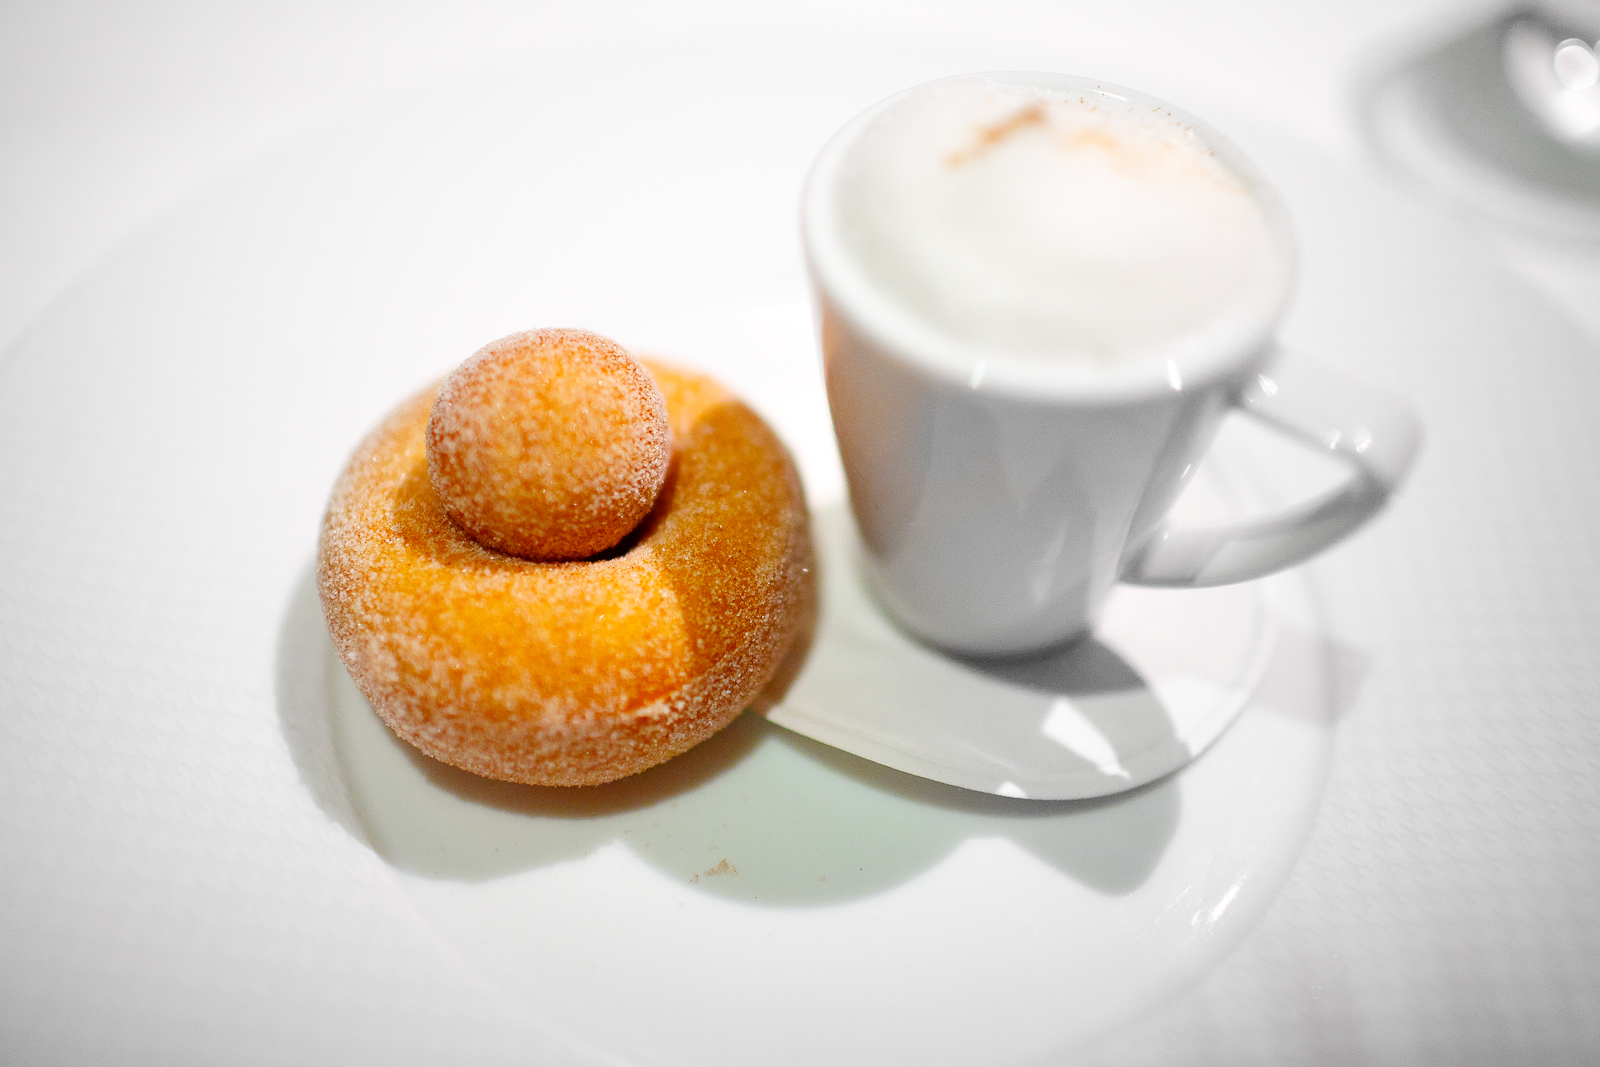 13th Course: Coffee and Doughnuts